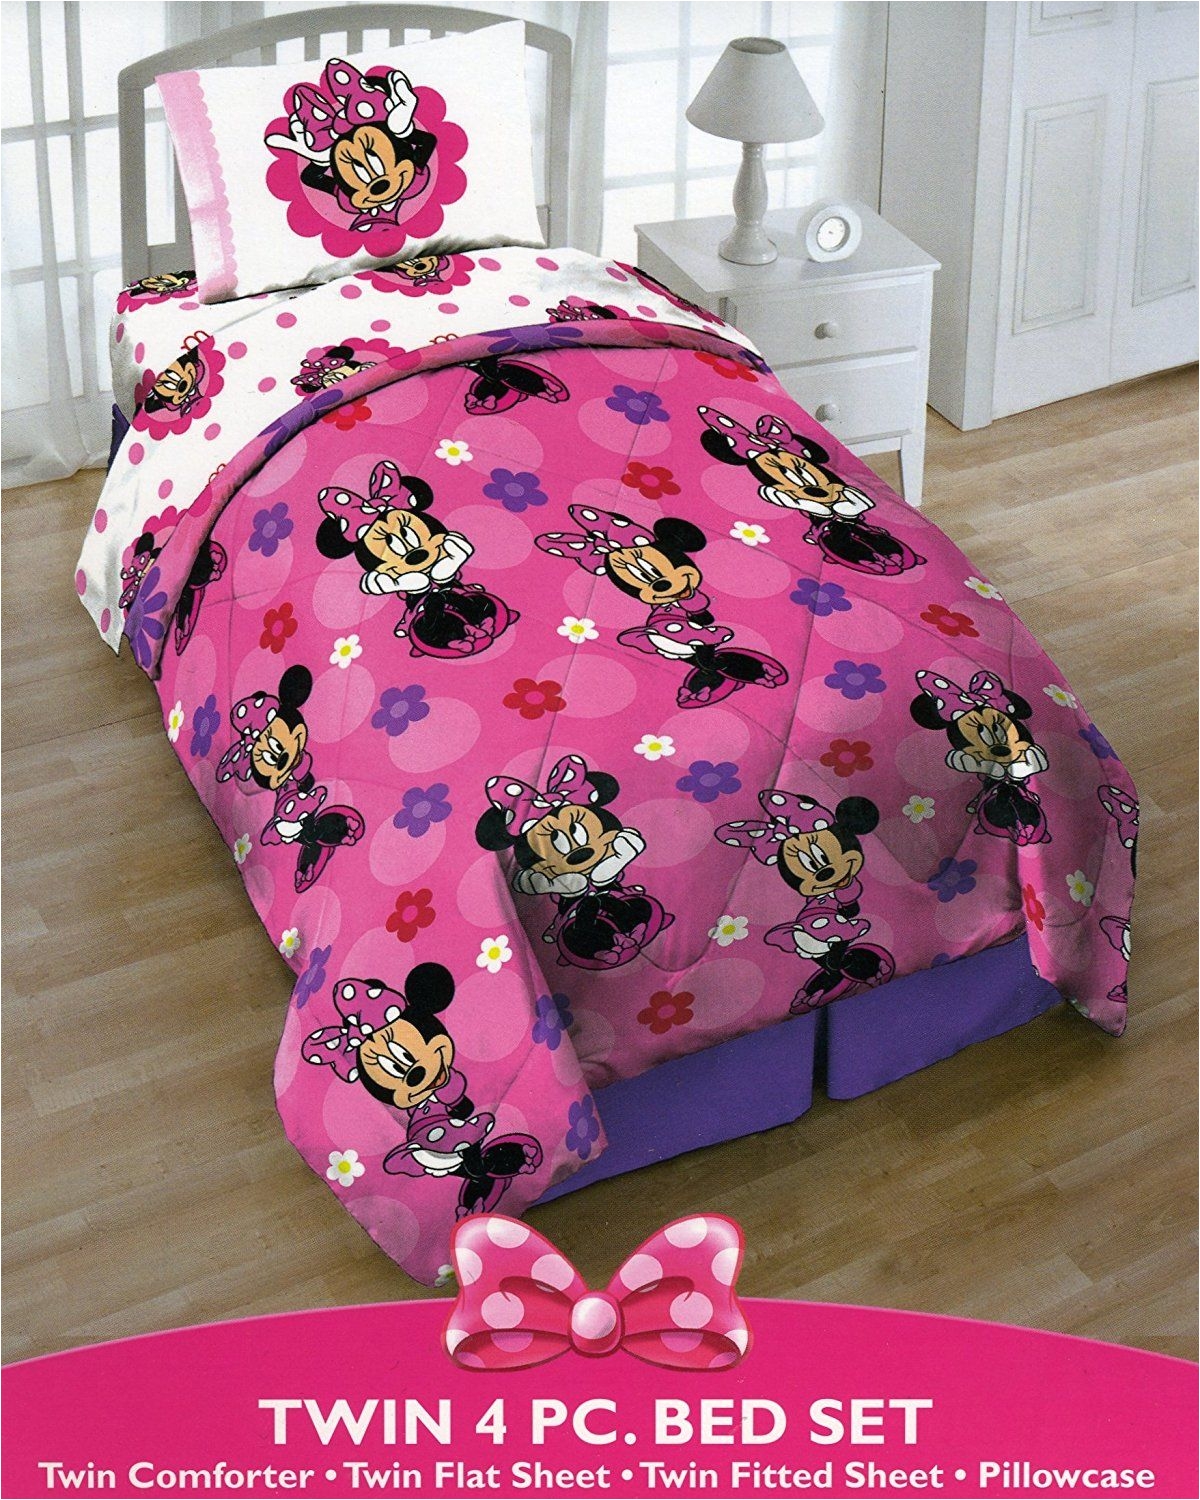 Minnie Mouse Bedroom Set Full Size Disney Minnie Mouse Bedding Christmas Bedding and Bedspread